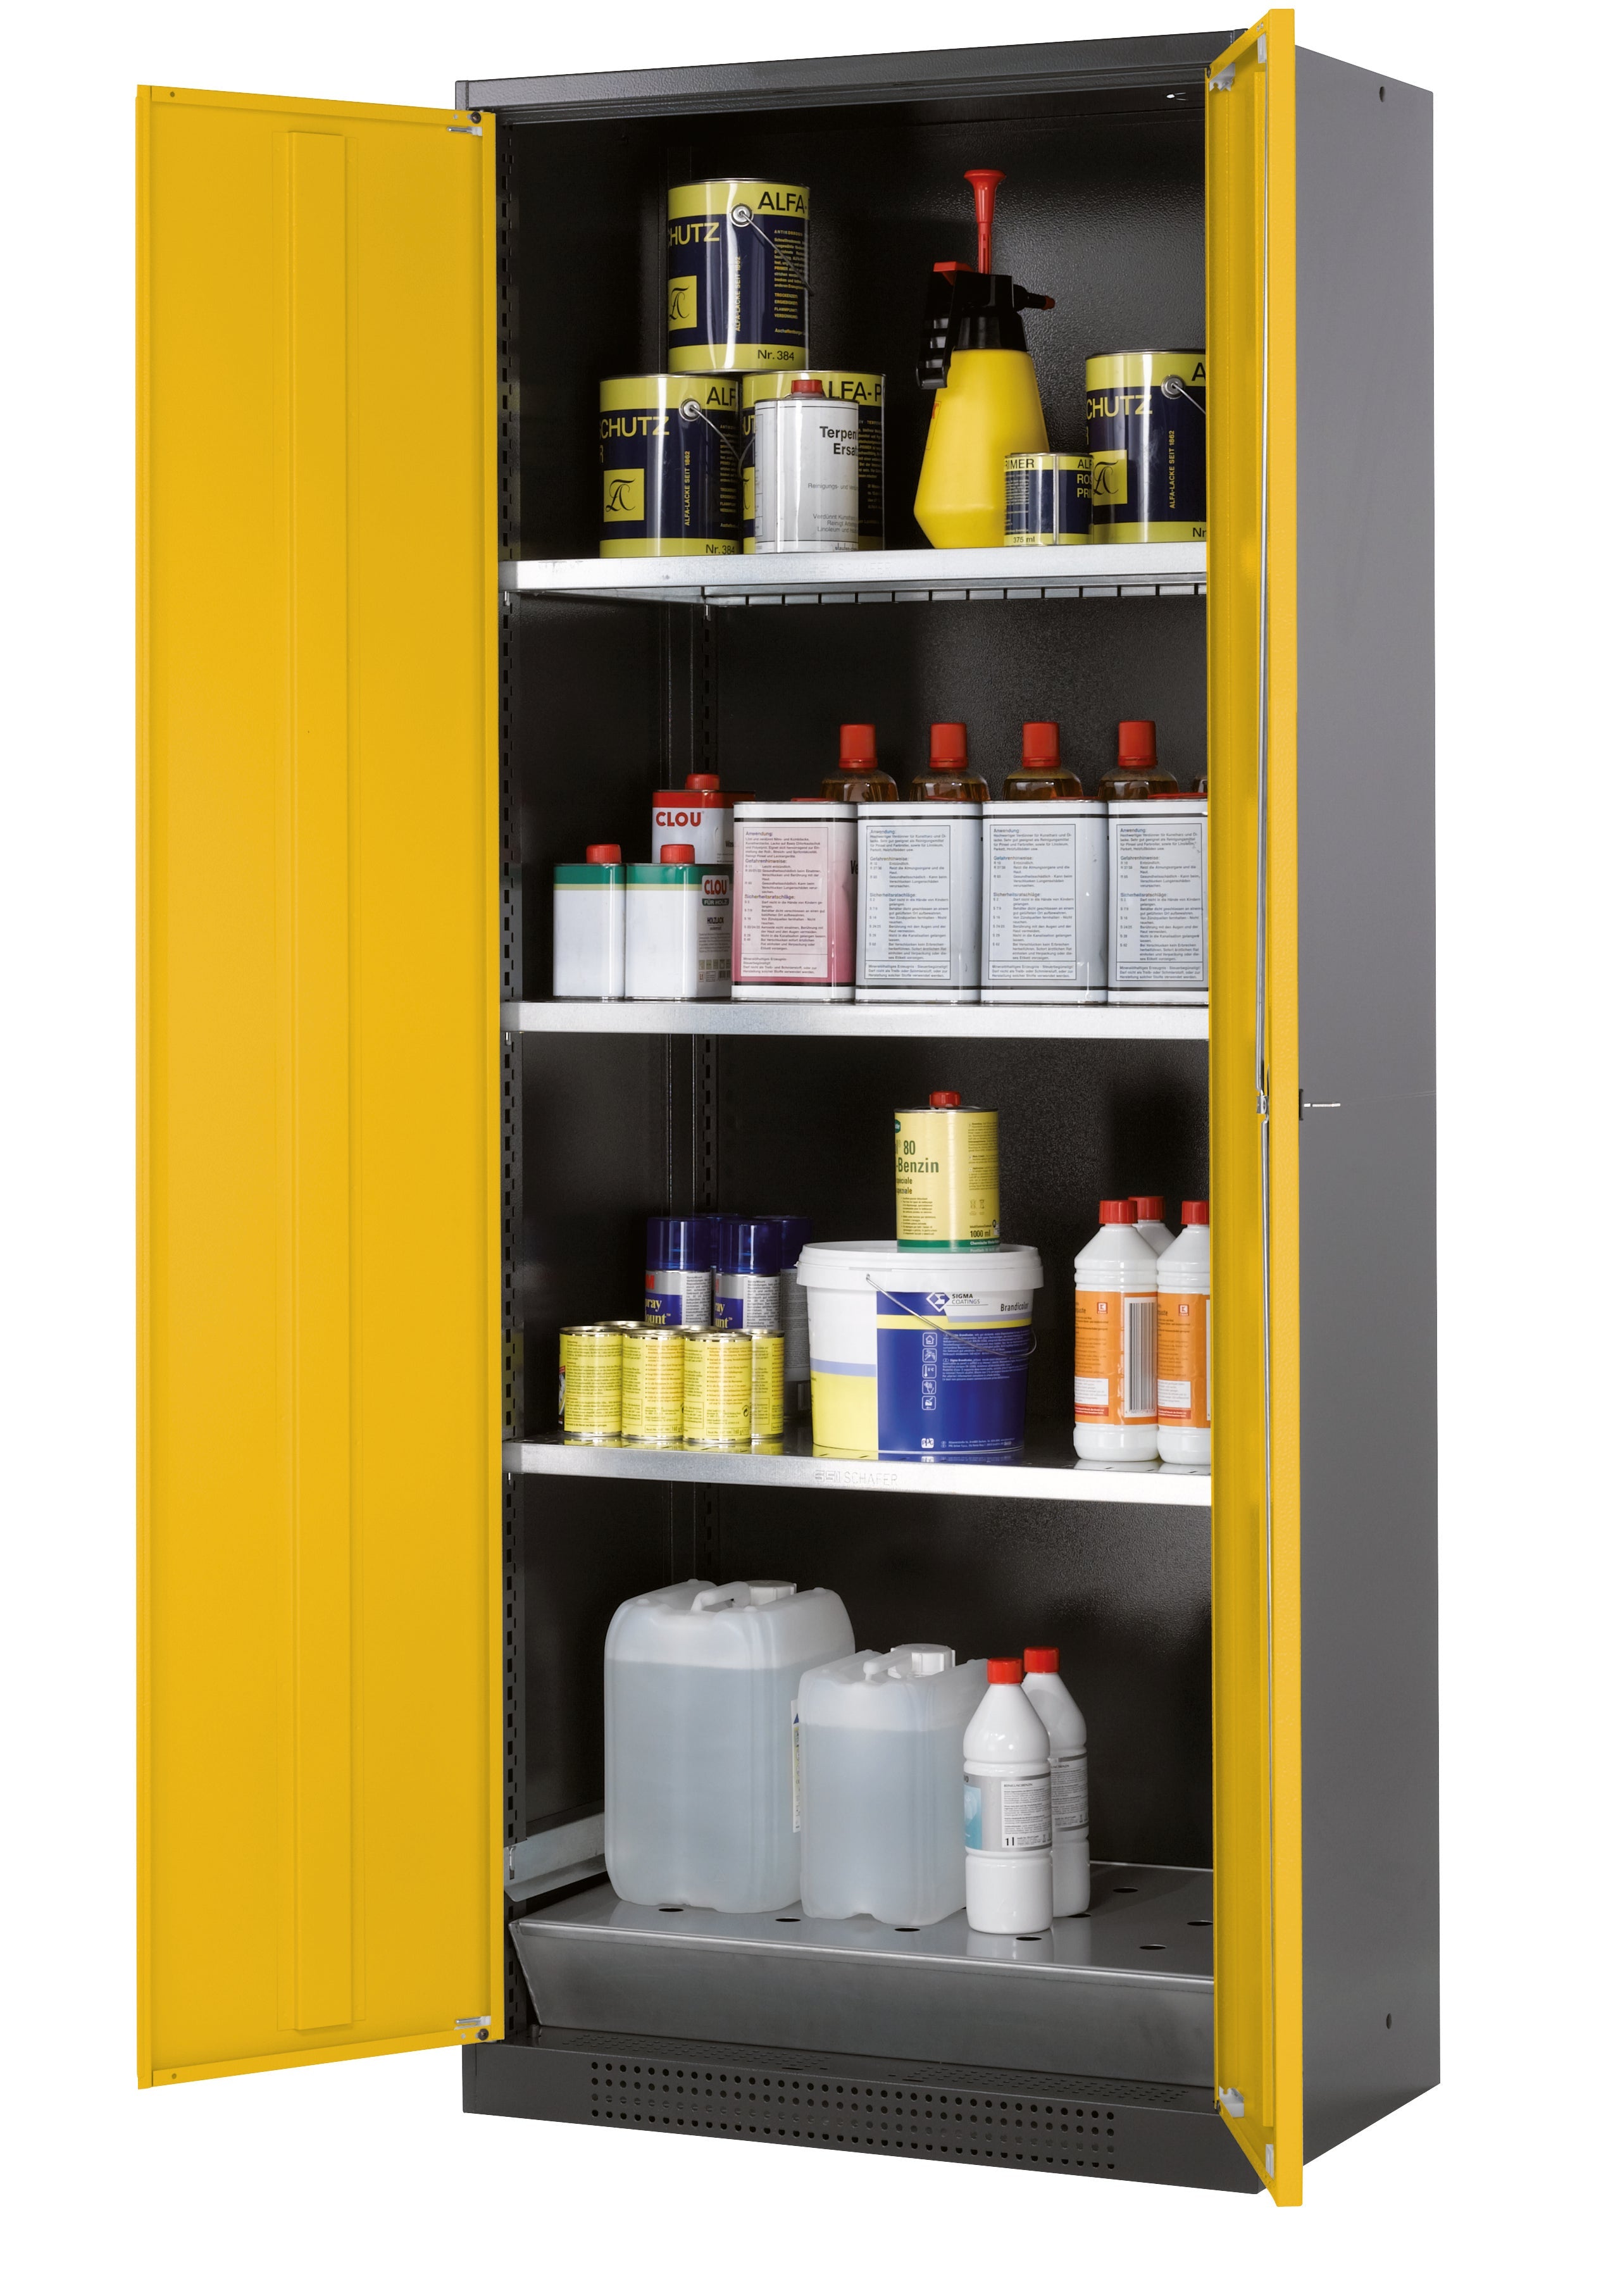 Chemical cabinet CS-CLASSIC model CS.195.081 in safety yellow RAL 1004 with 3x standard shelves (sheet steel)